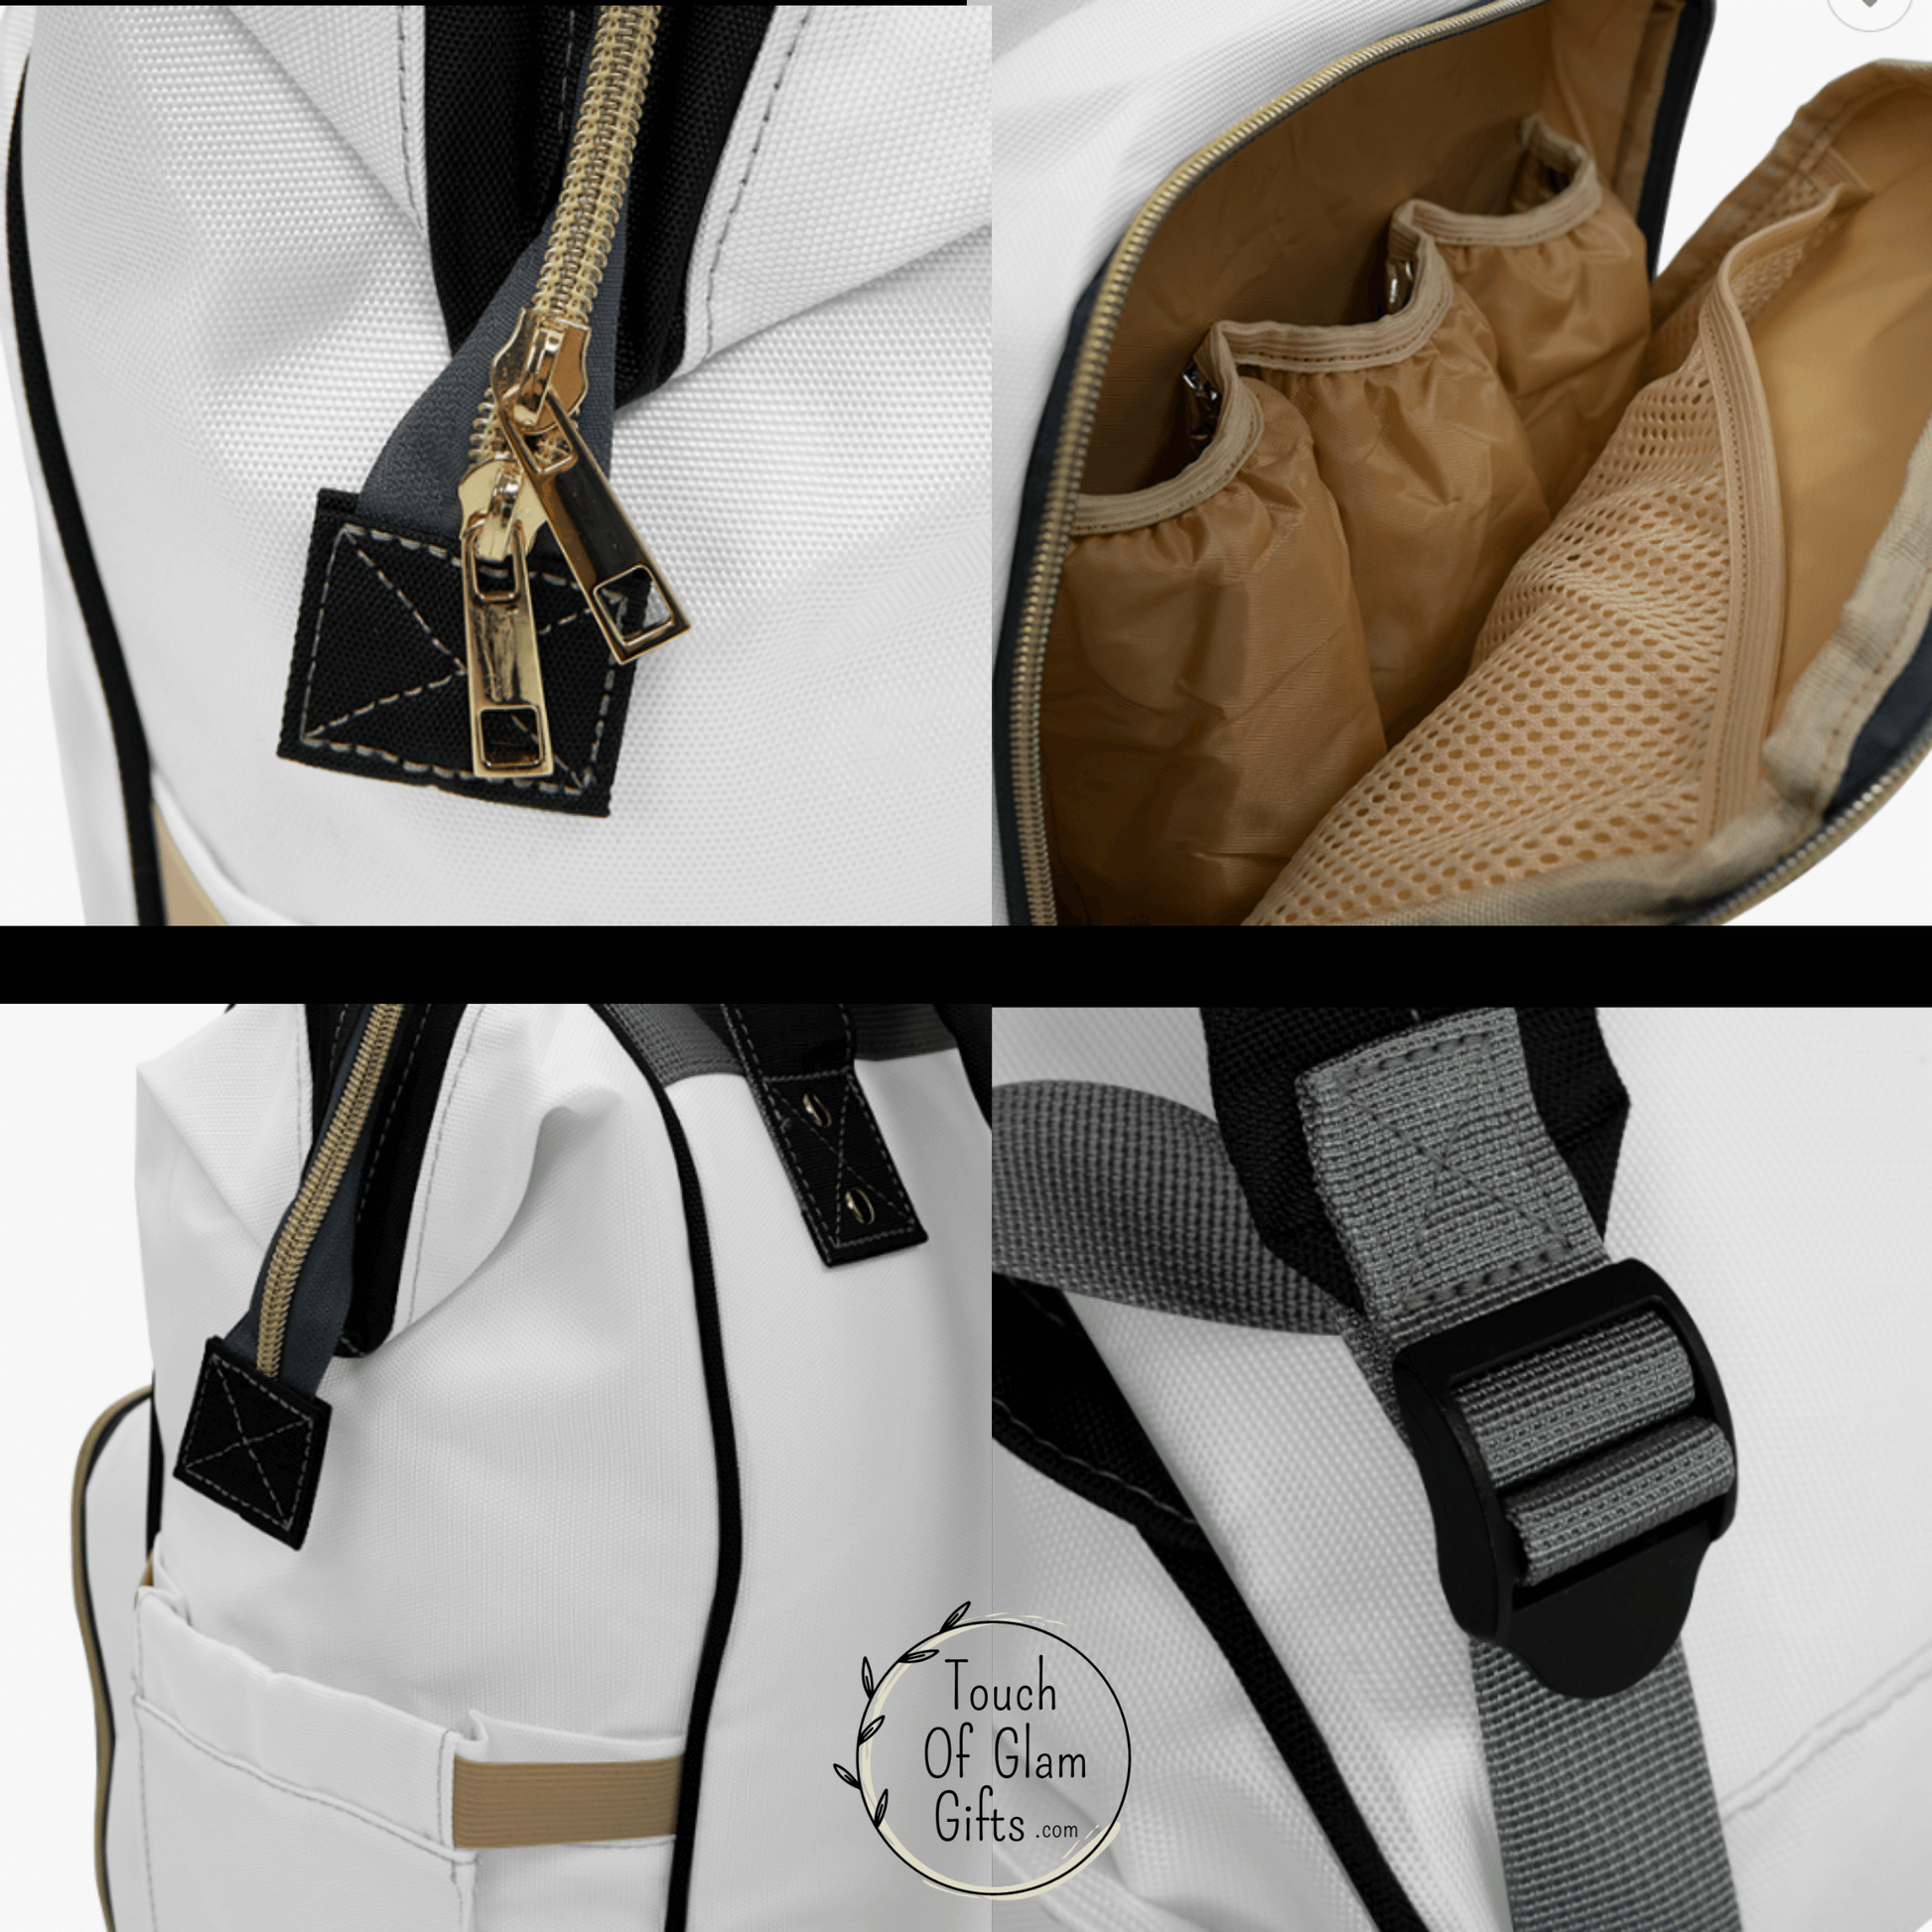 Up close details of our multipurpose diaper backpack show the gold colored zipper, the outer pocket with storage pockets and the grey adjustable backpack straps.